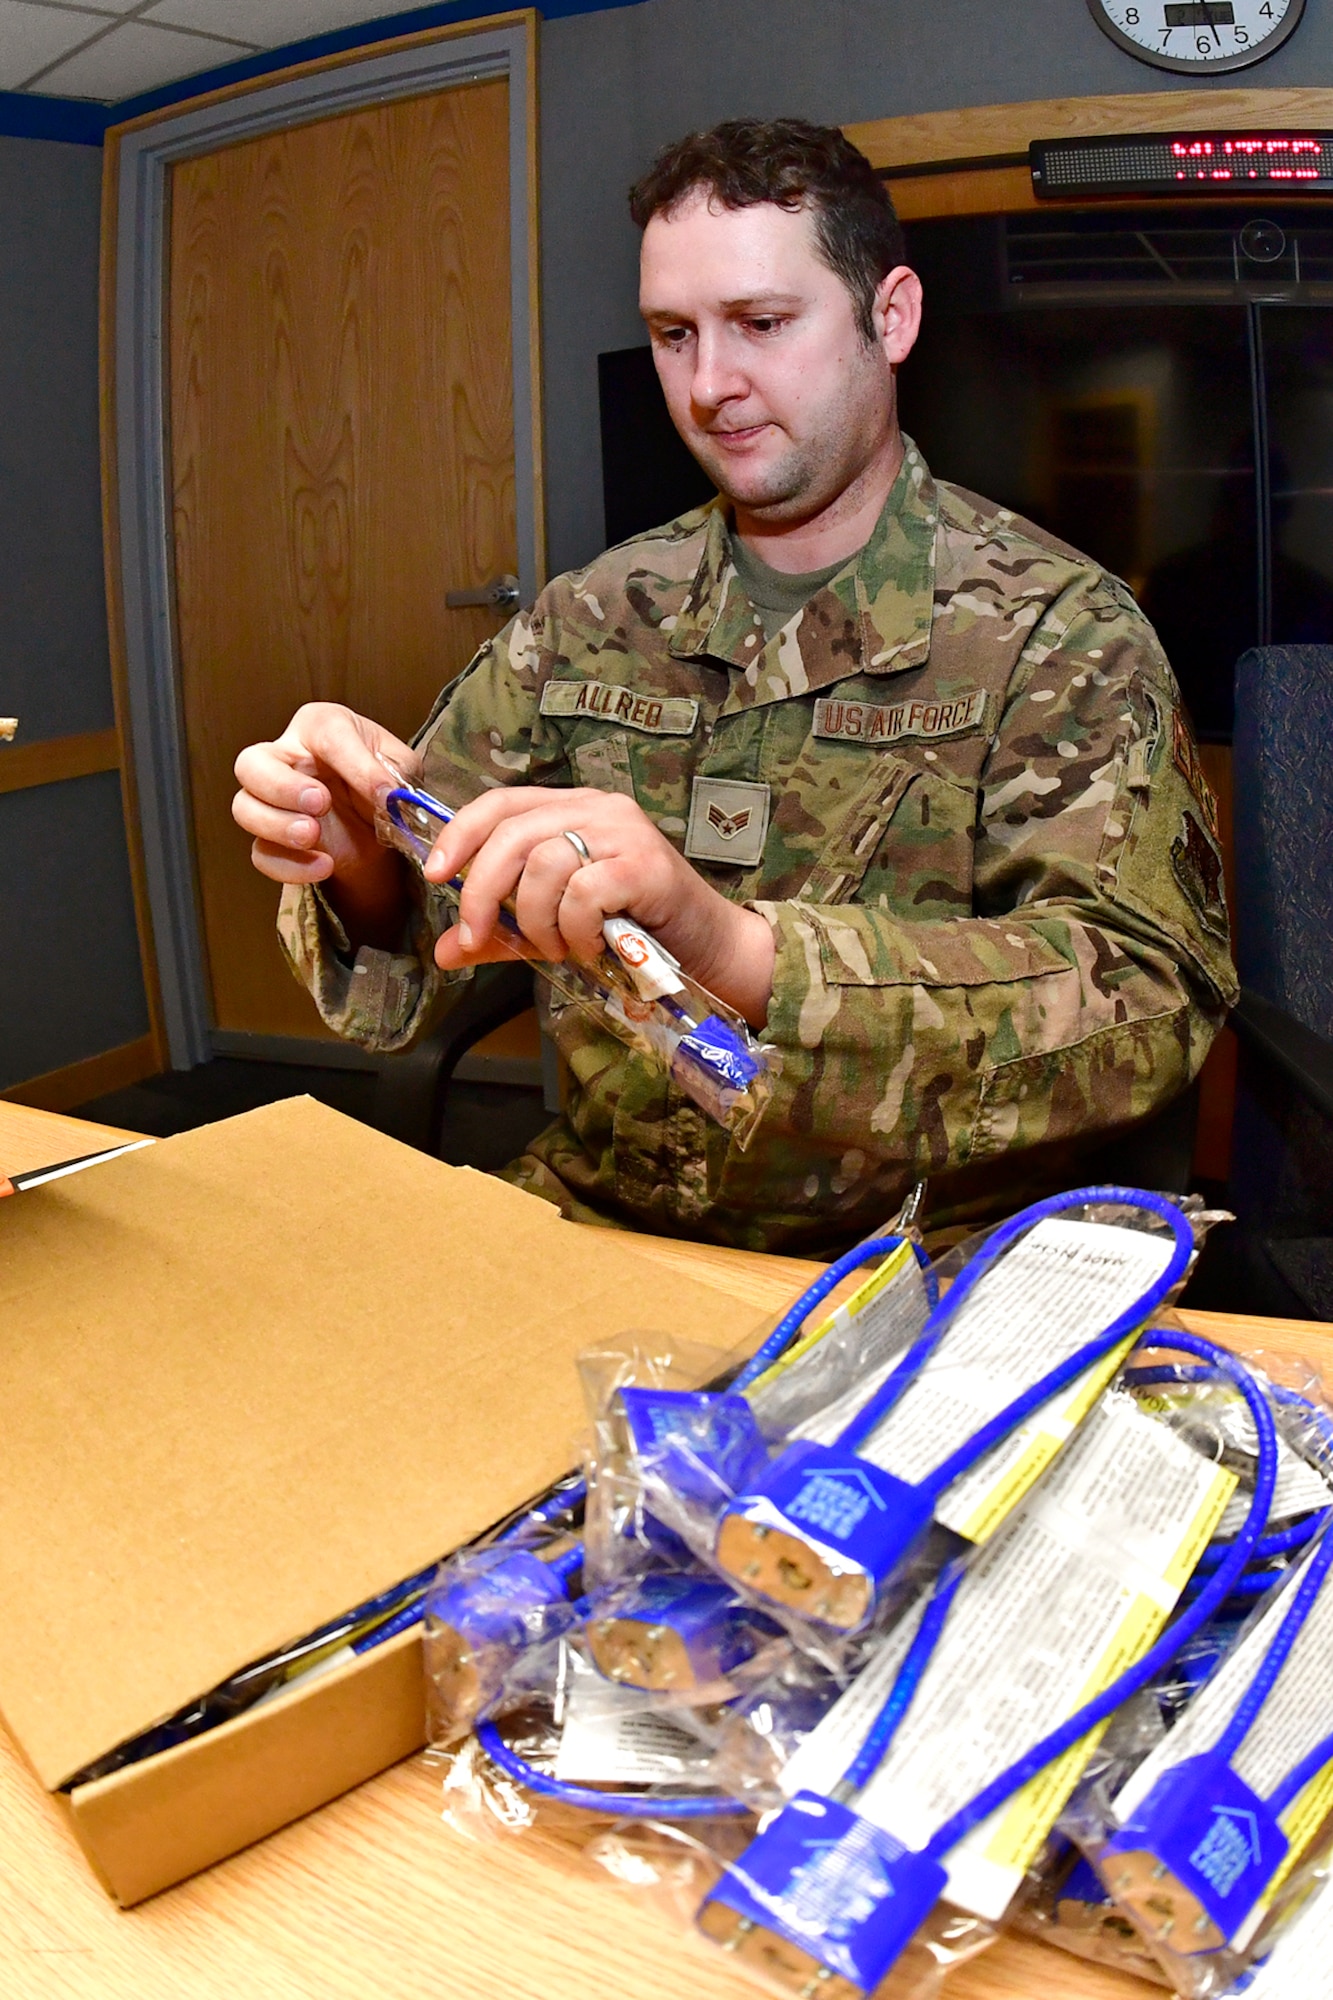 Senior Airman Daniel Allred, 388th Maintenance Squadron, volunteers to prepare suicide prevention cable locks for distribution Feb. 7, 2023, at Hill Air Force Base, Utah. These locks were provided by the Headquarters Air Force Suicide Prevention Program and are known as a time-based prevention tool, designed to delay access to firearms and medicine, for those contemplating suicide during an emotionally charged moment. (U.S. Air Force photo by Todd Cromar)